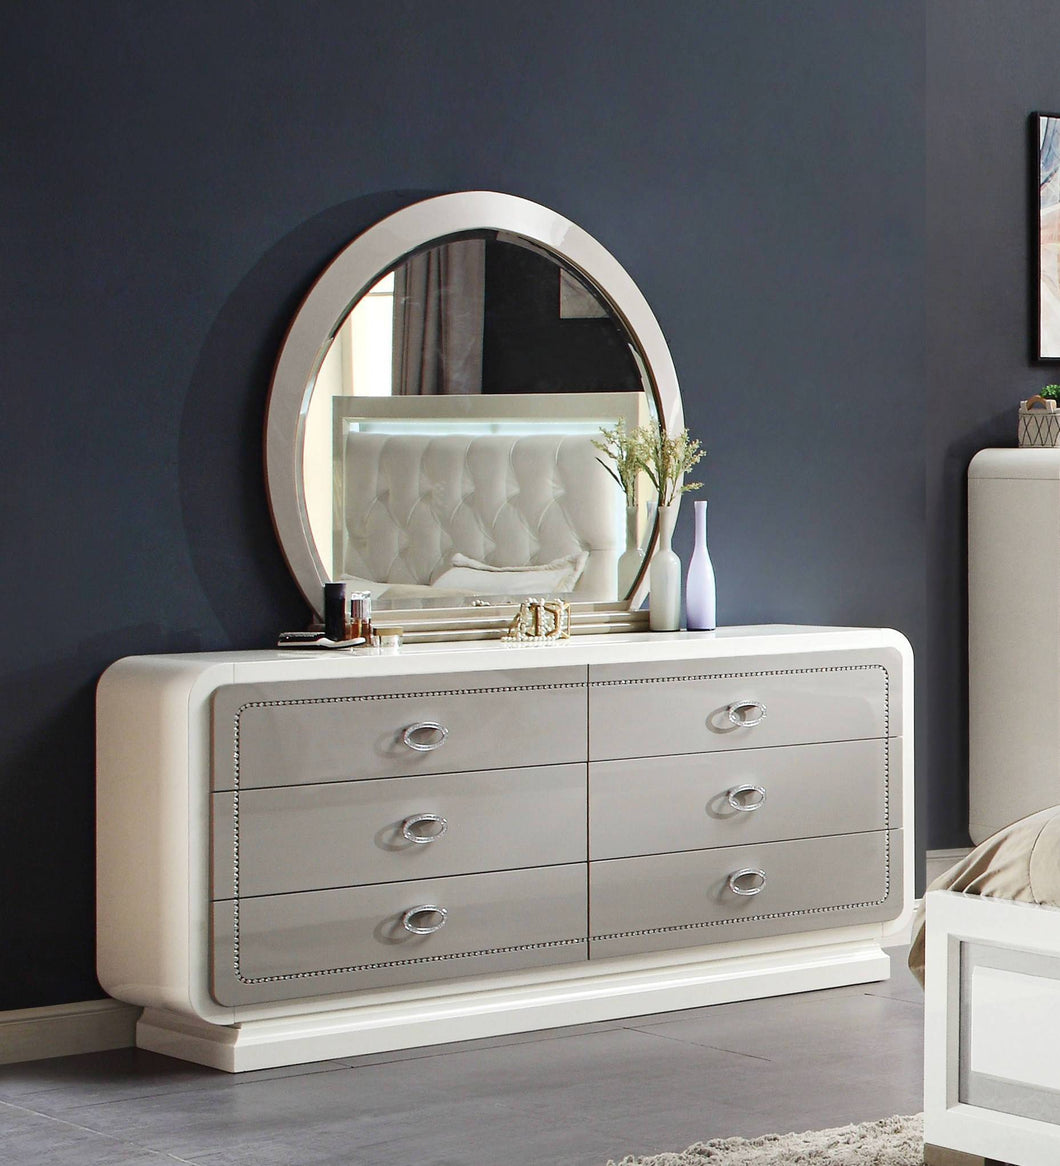 Acme Allendale Ivory Wood Finish Dresser With Mirror